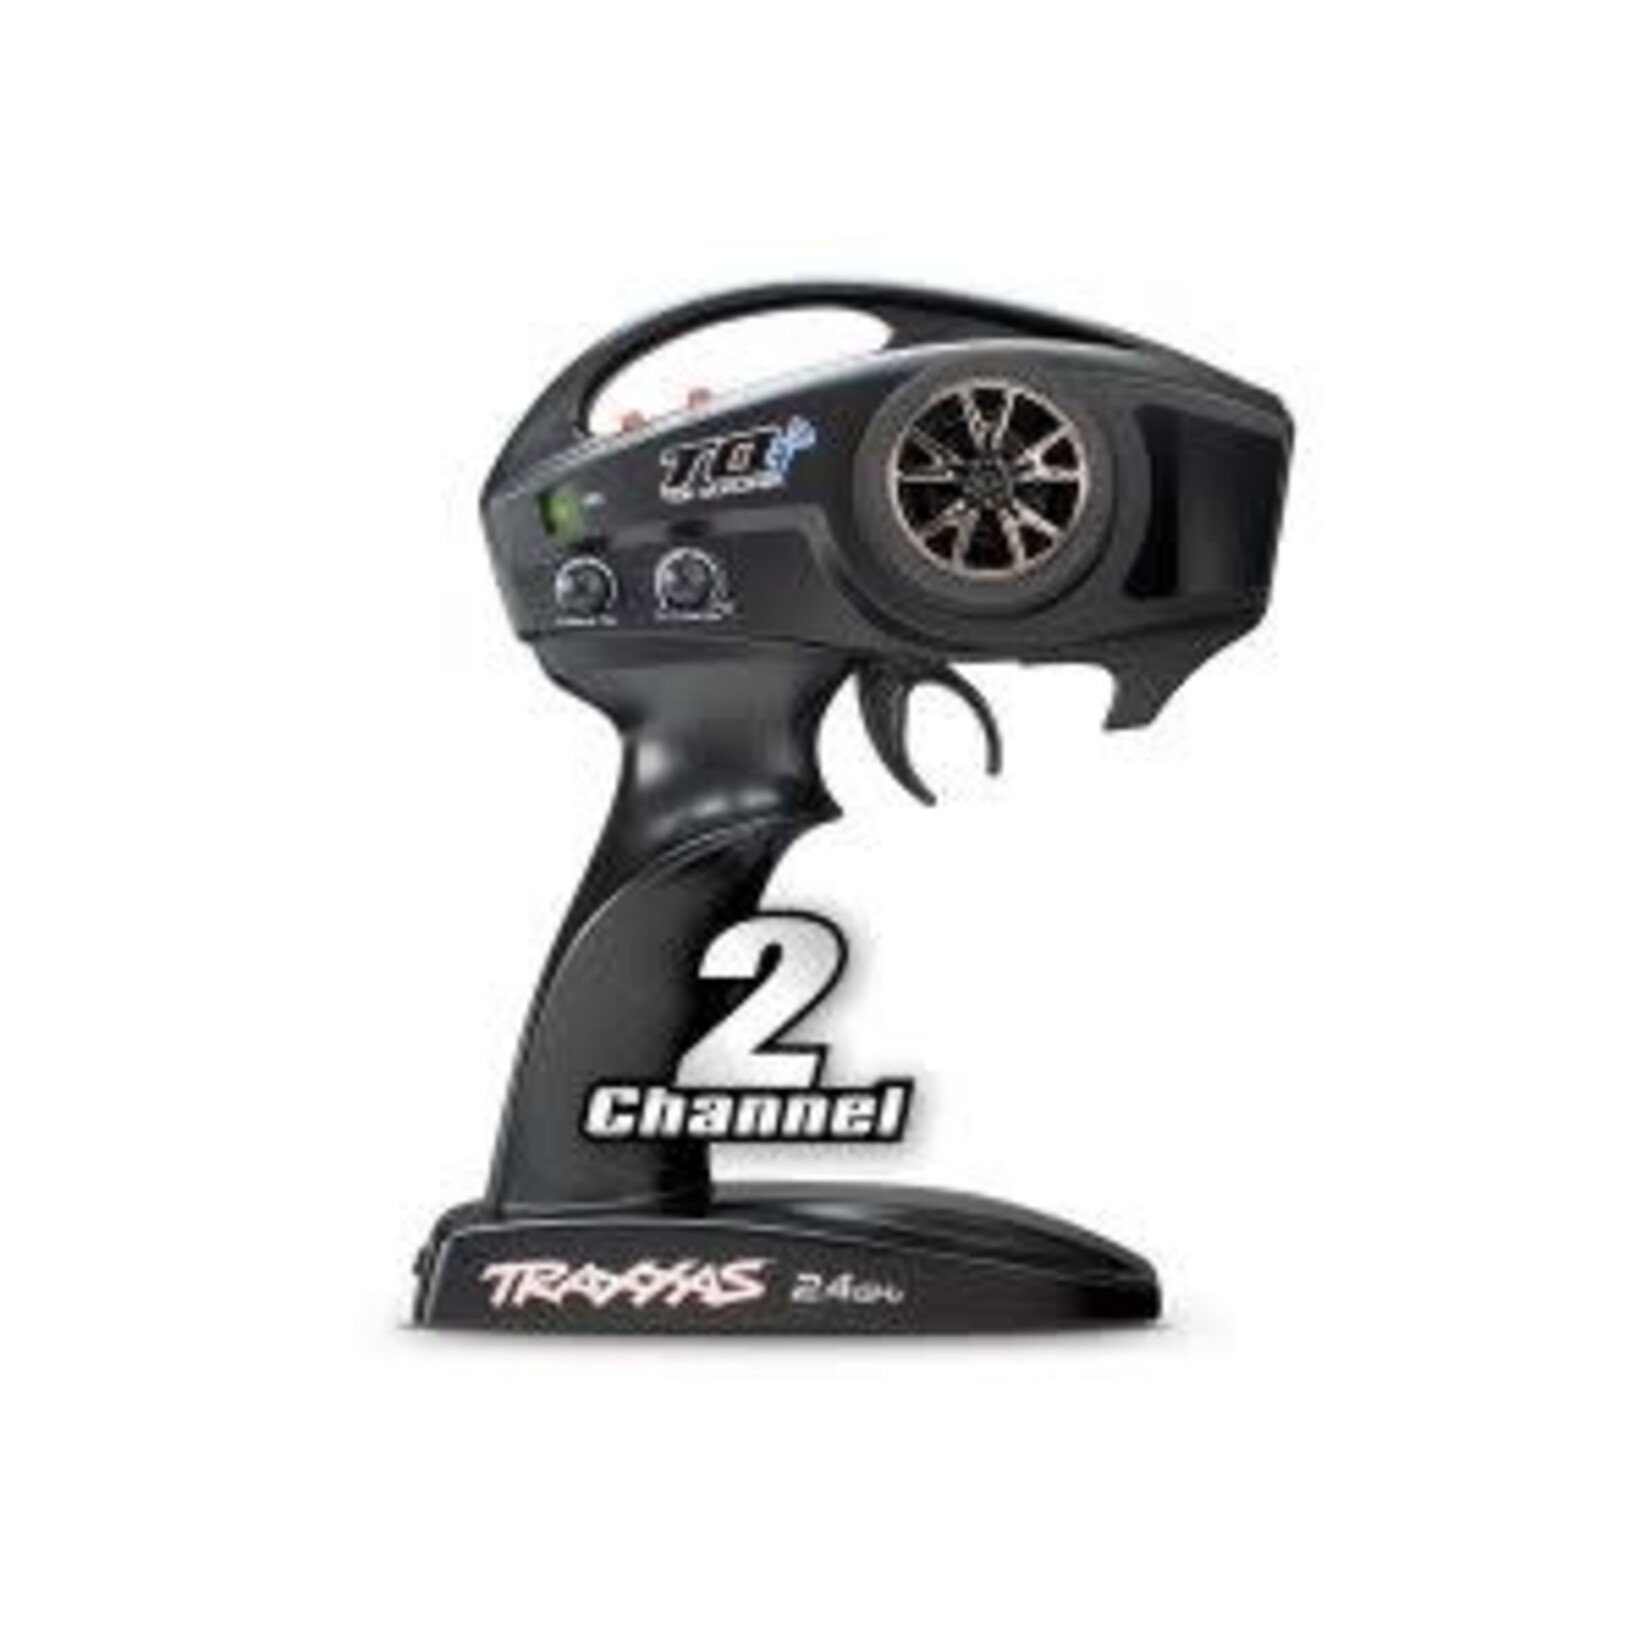 Traxxas 6509R  TQi 2.4 GHz High Output radio system, 2-channel, Traxxas Link™ enabled, TSM (2-ch transmitter, 5-ch micro receiver)